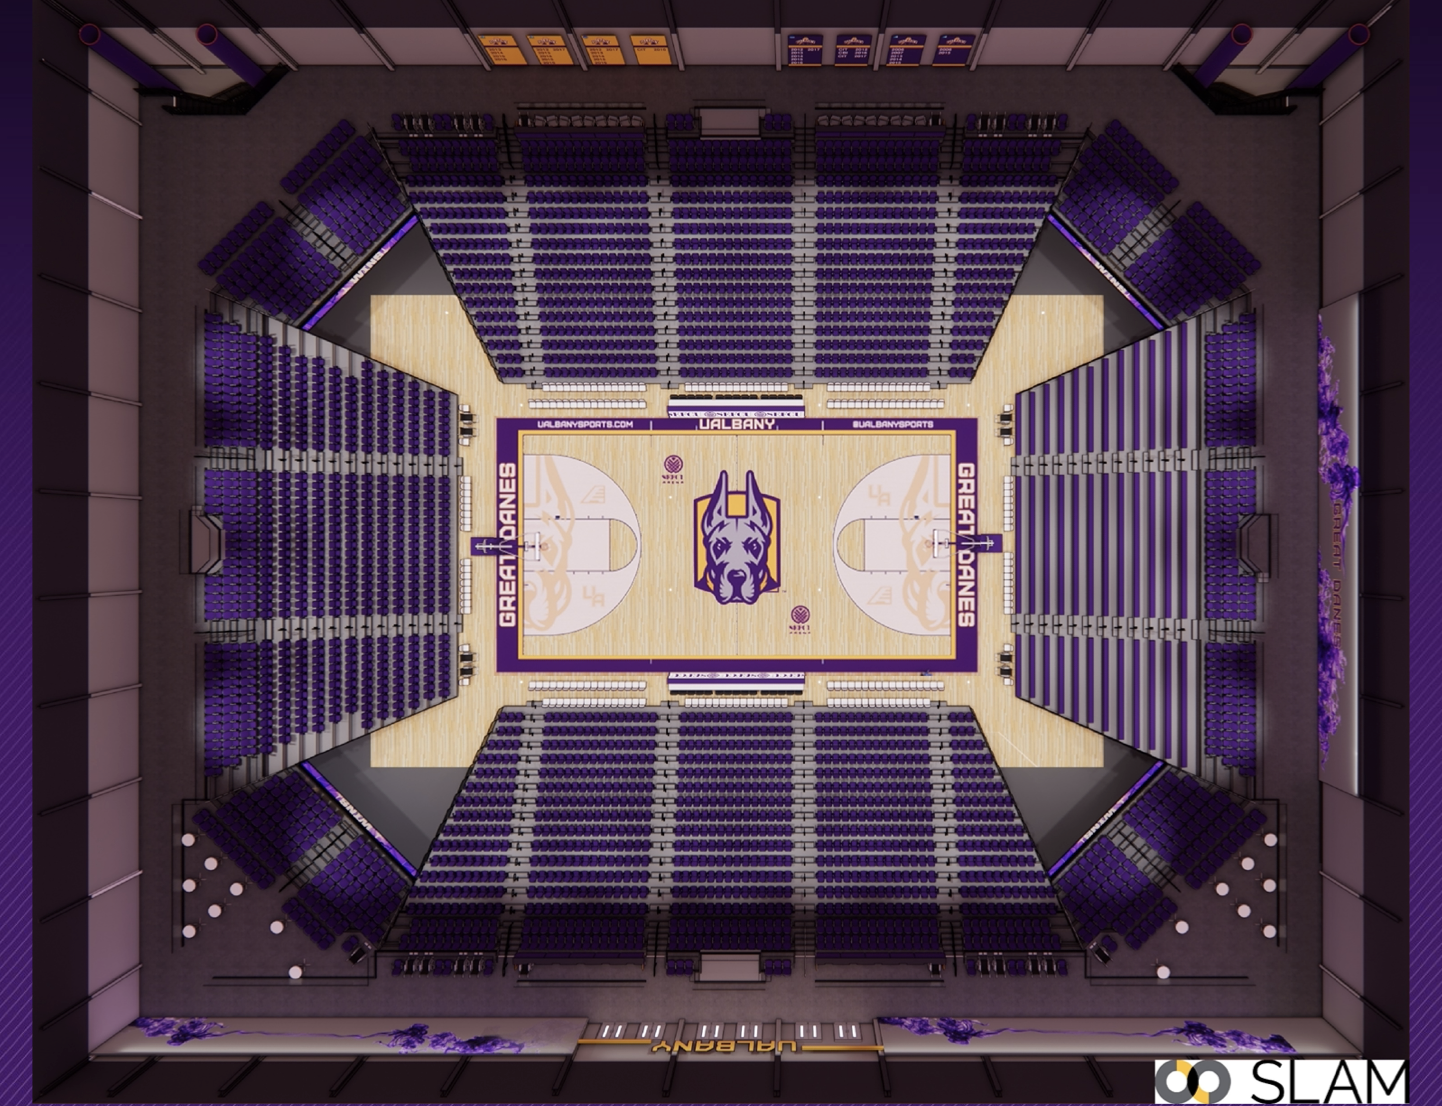 A rendering that depicts the new seat configuration in the SEFCU Arena, with purple bleachers on four sides of the basketball court and Damien's face at center court.